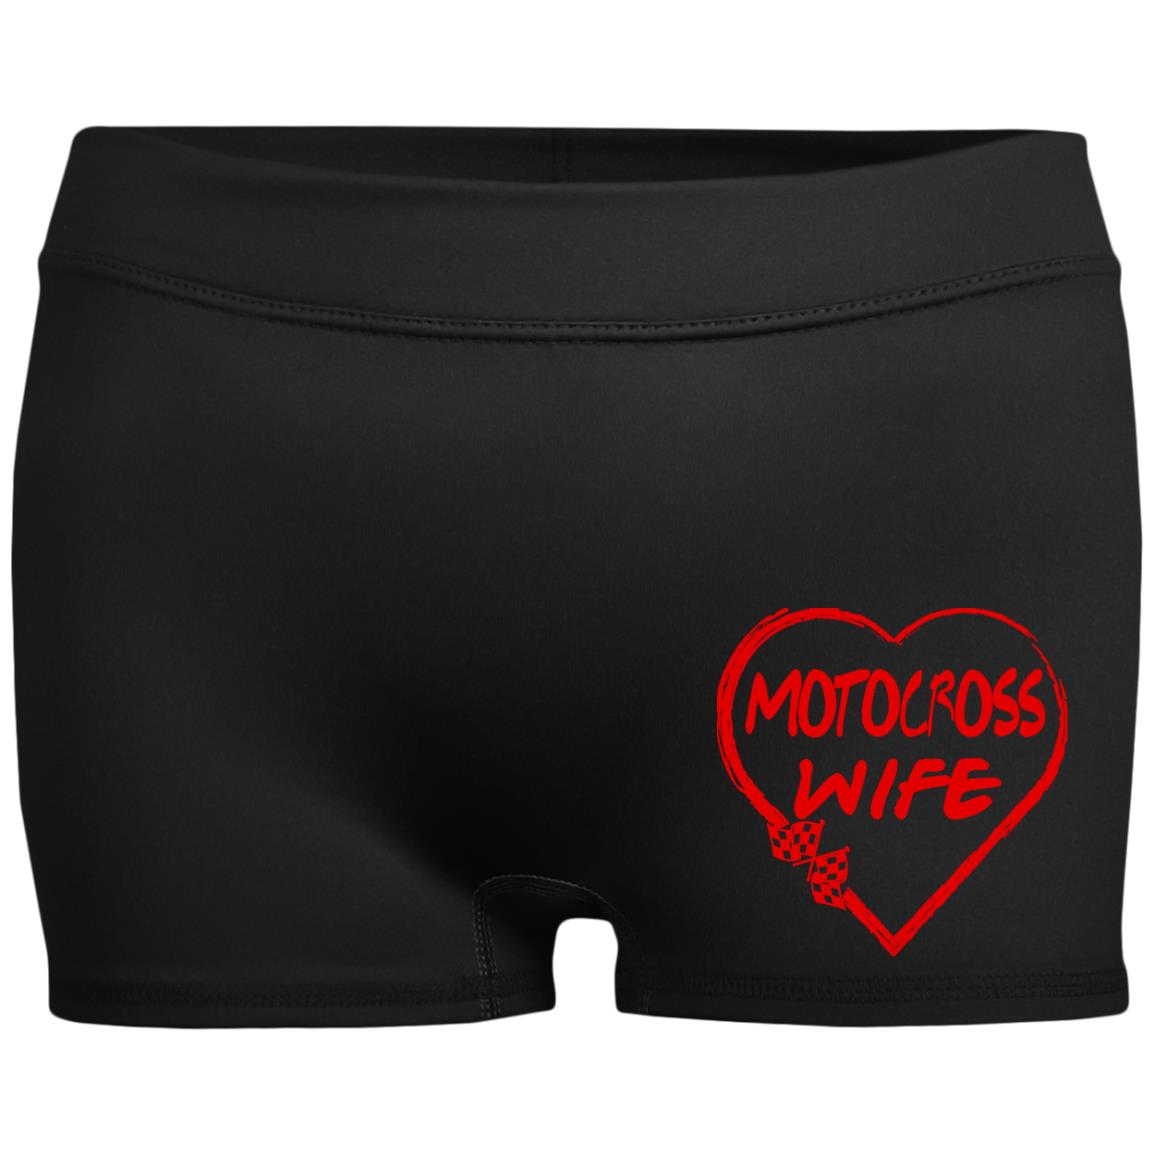 Motocross Wife Ladies' Fitted Moisture-Wicking 2.5 inch Inseam Shorts